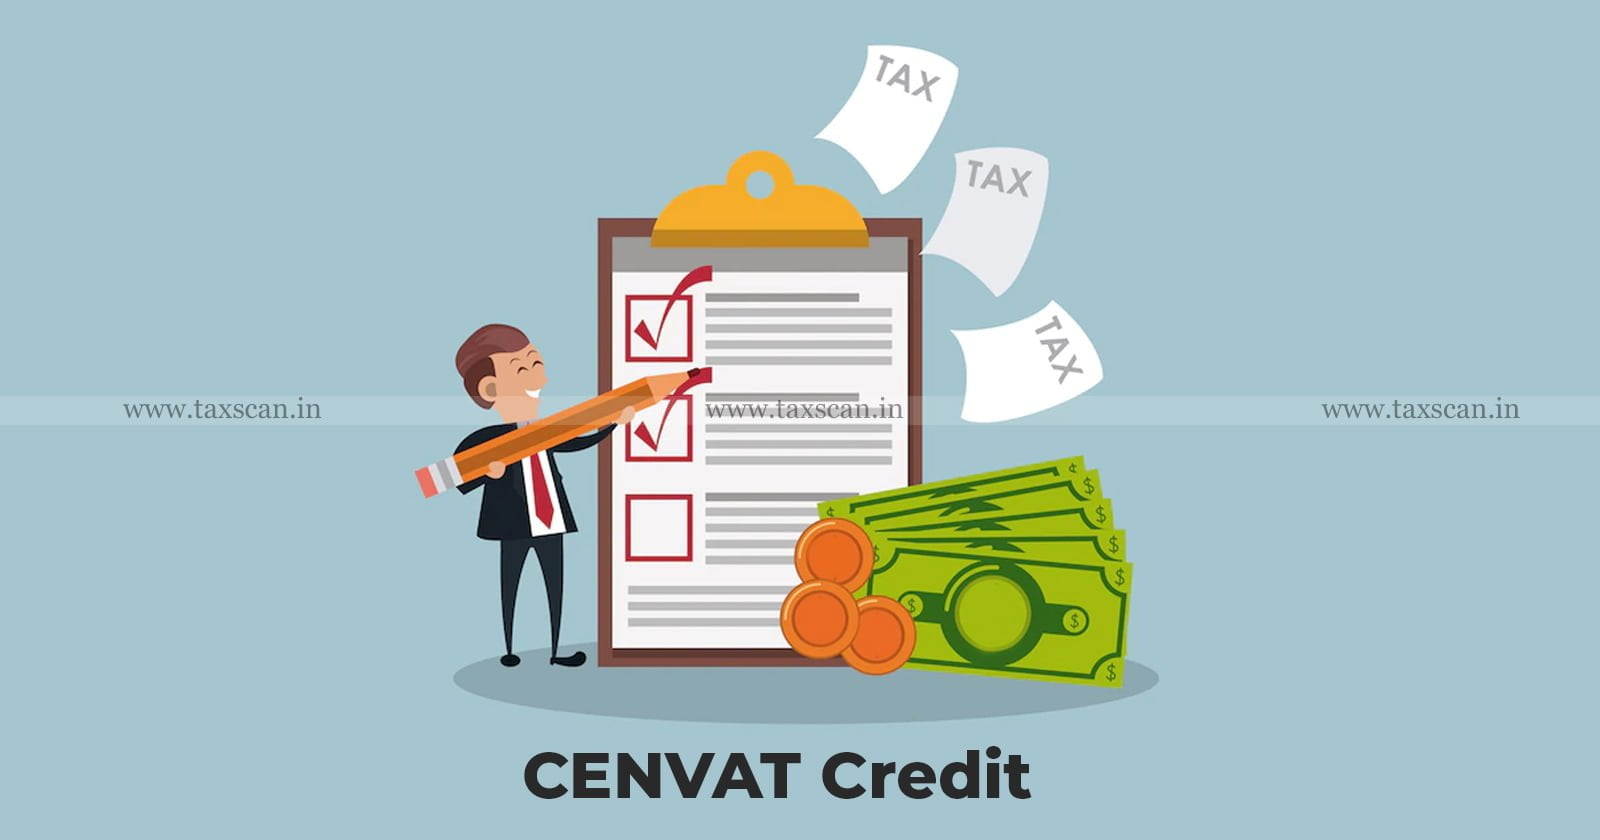 CENVAT Credit - Avail on the Basis of Second Stage Dealer's Invoices - CESTAT - TAXSCAN